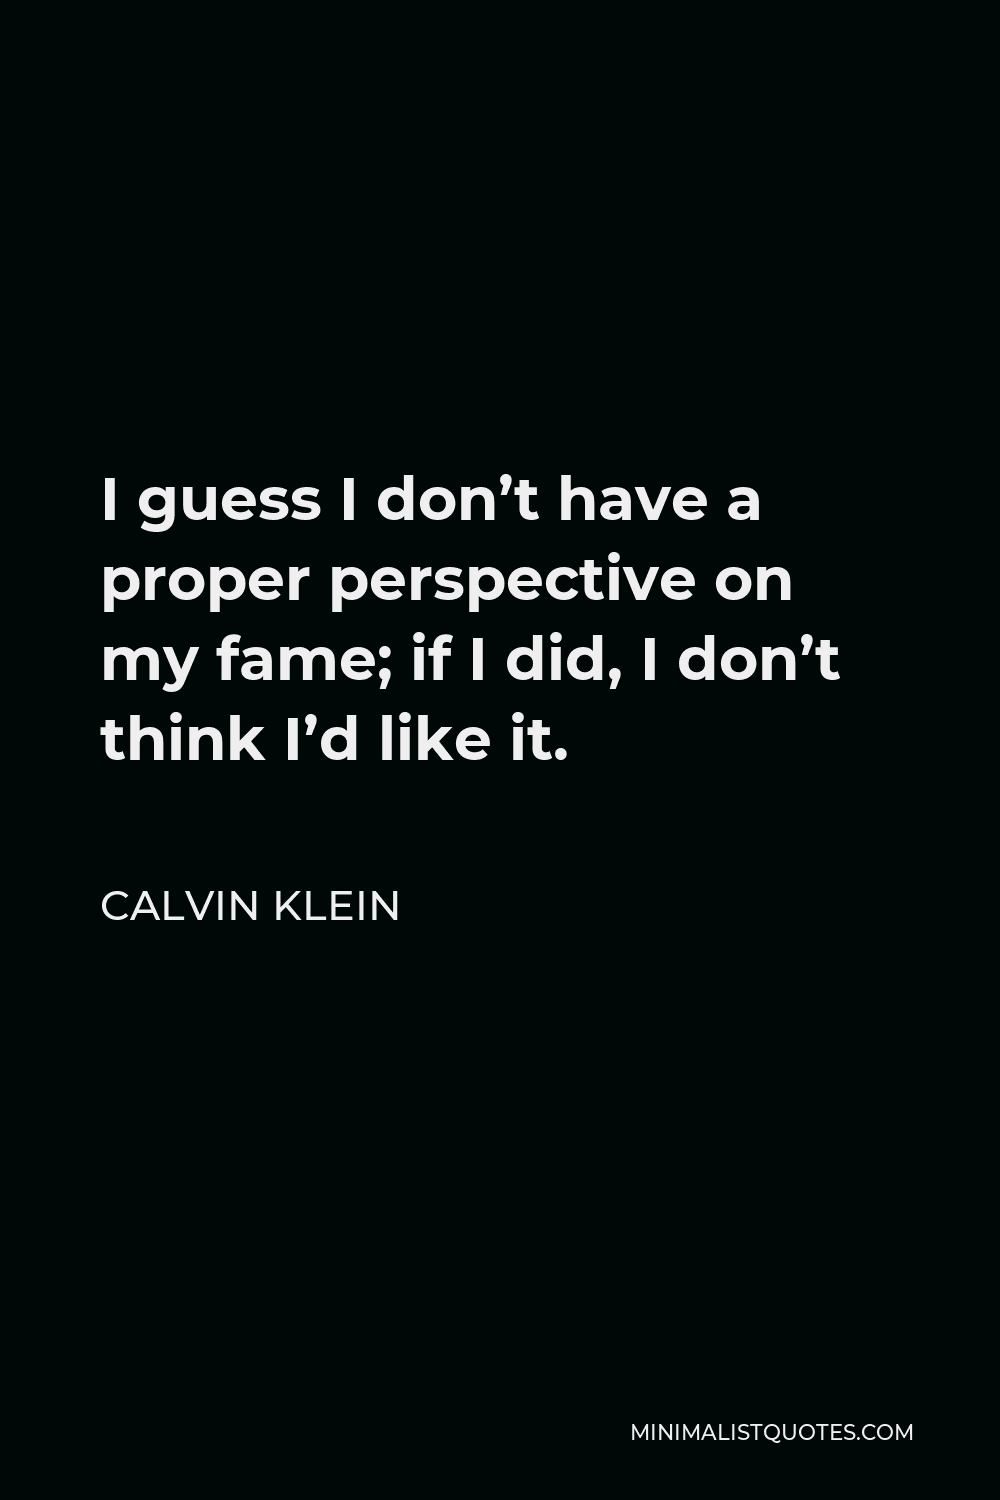 Calvin Klein Quote: I guess I don't have a proper perspective on my fame;  if I did, I don't think I'd like it.